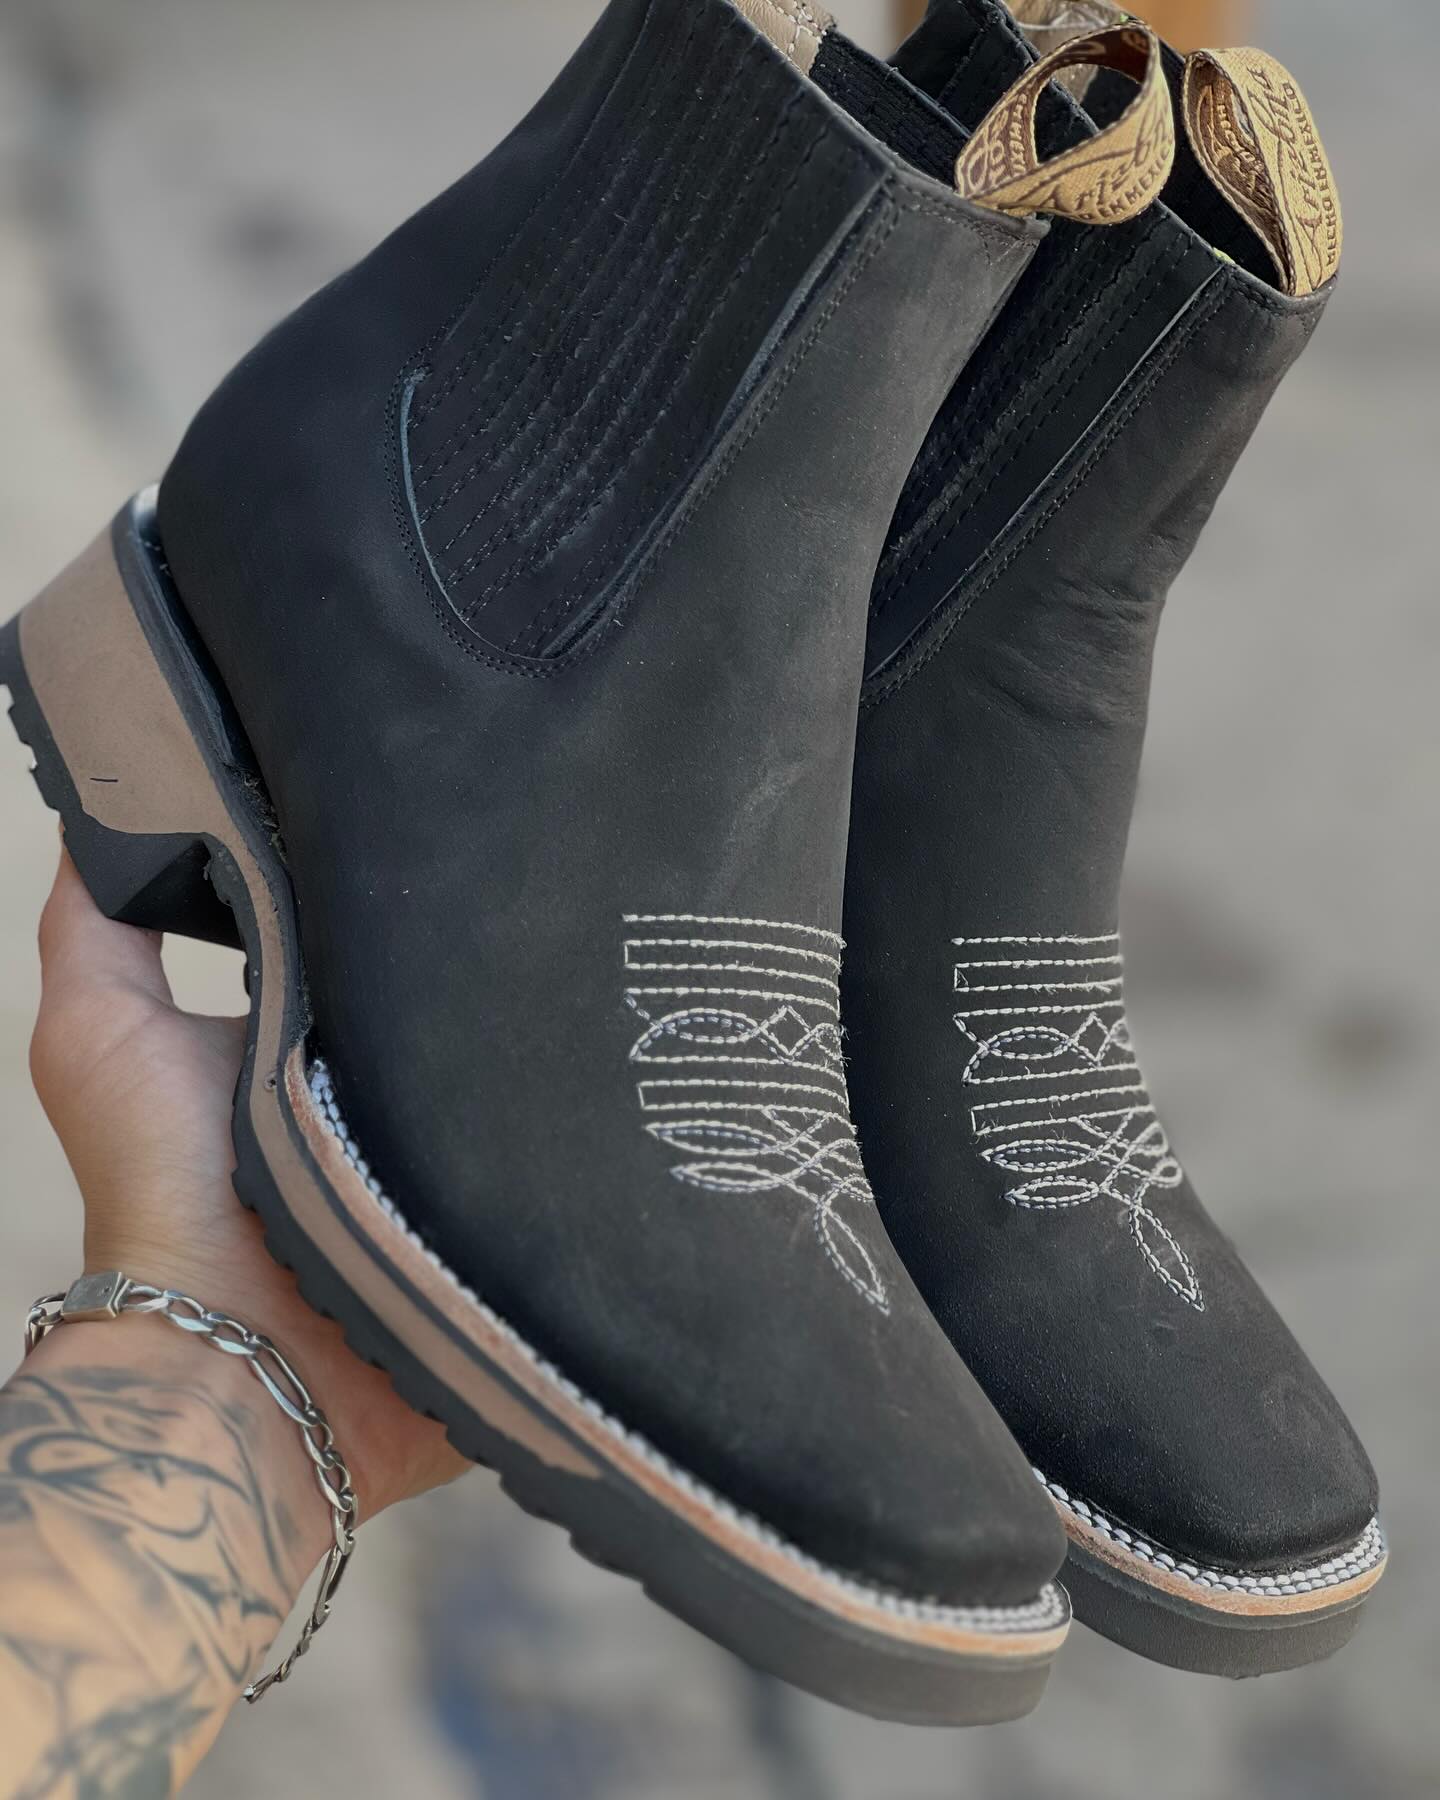 The Earl Ave Boots